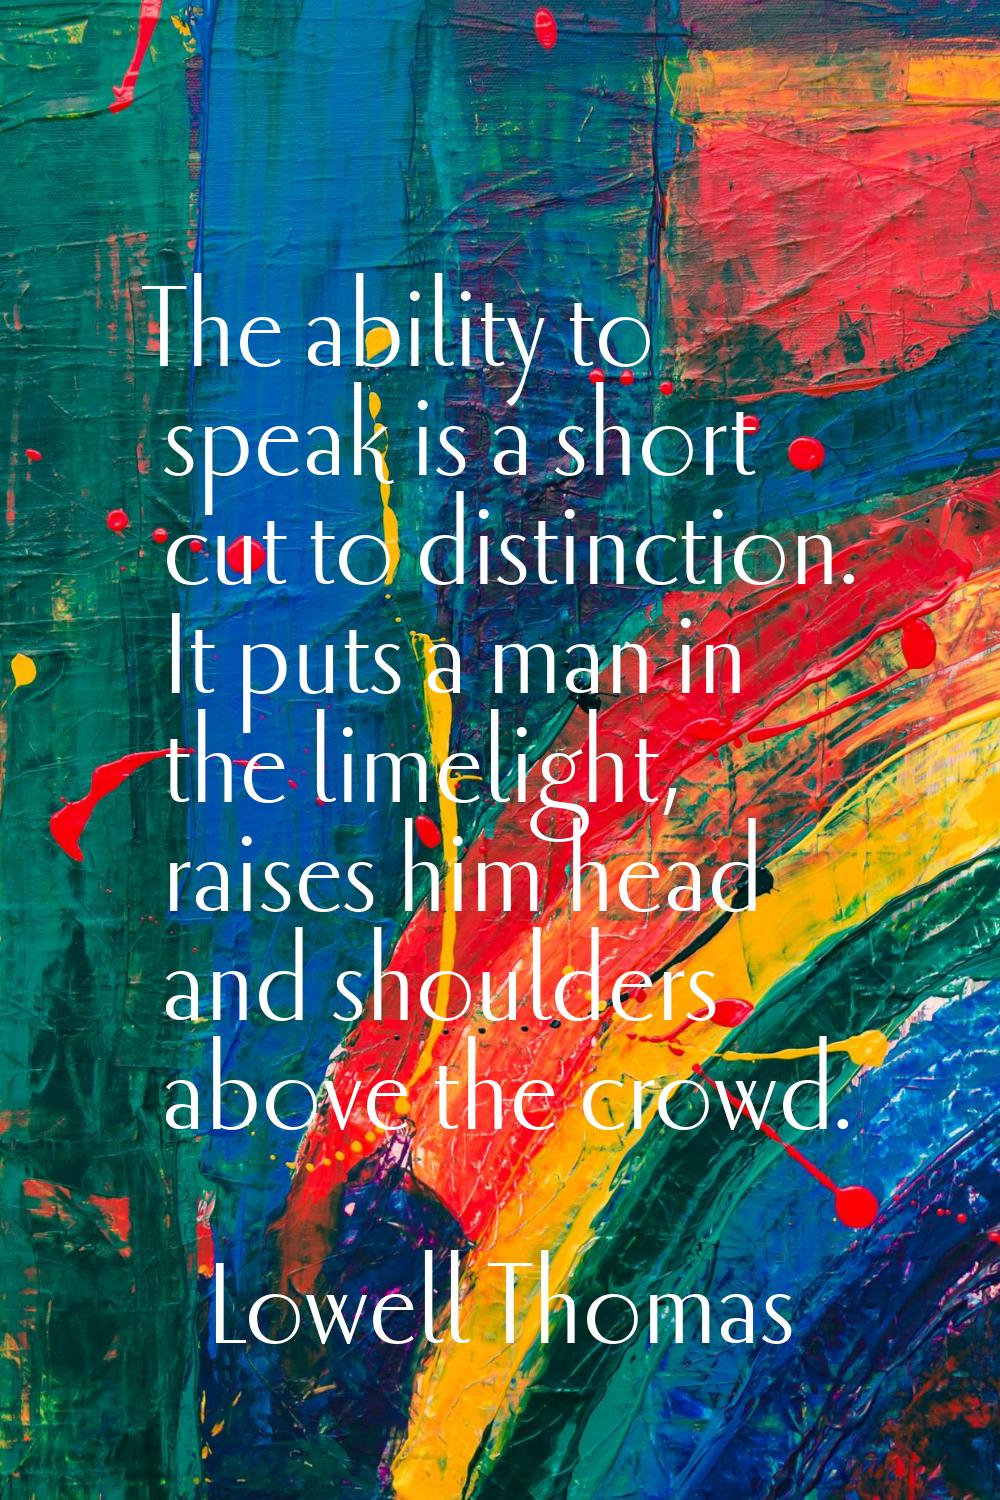 The ability to speak is a short cut to distinction. It puts a man in the limelight, raises him head